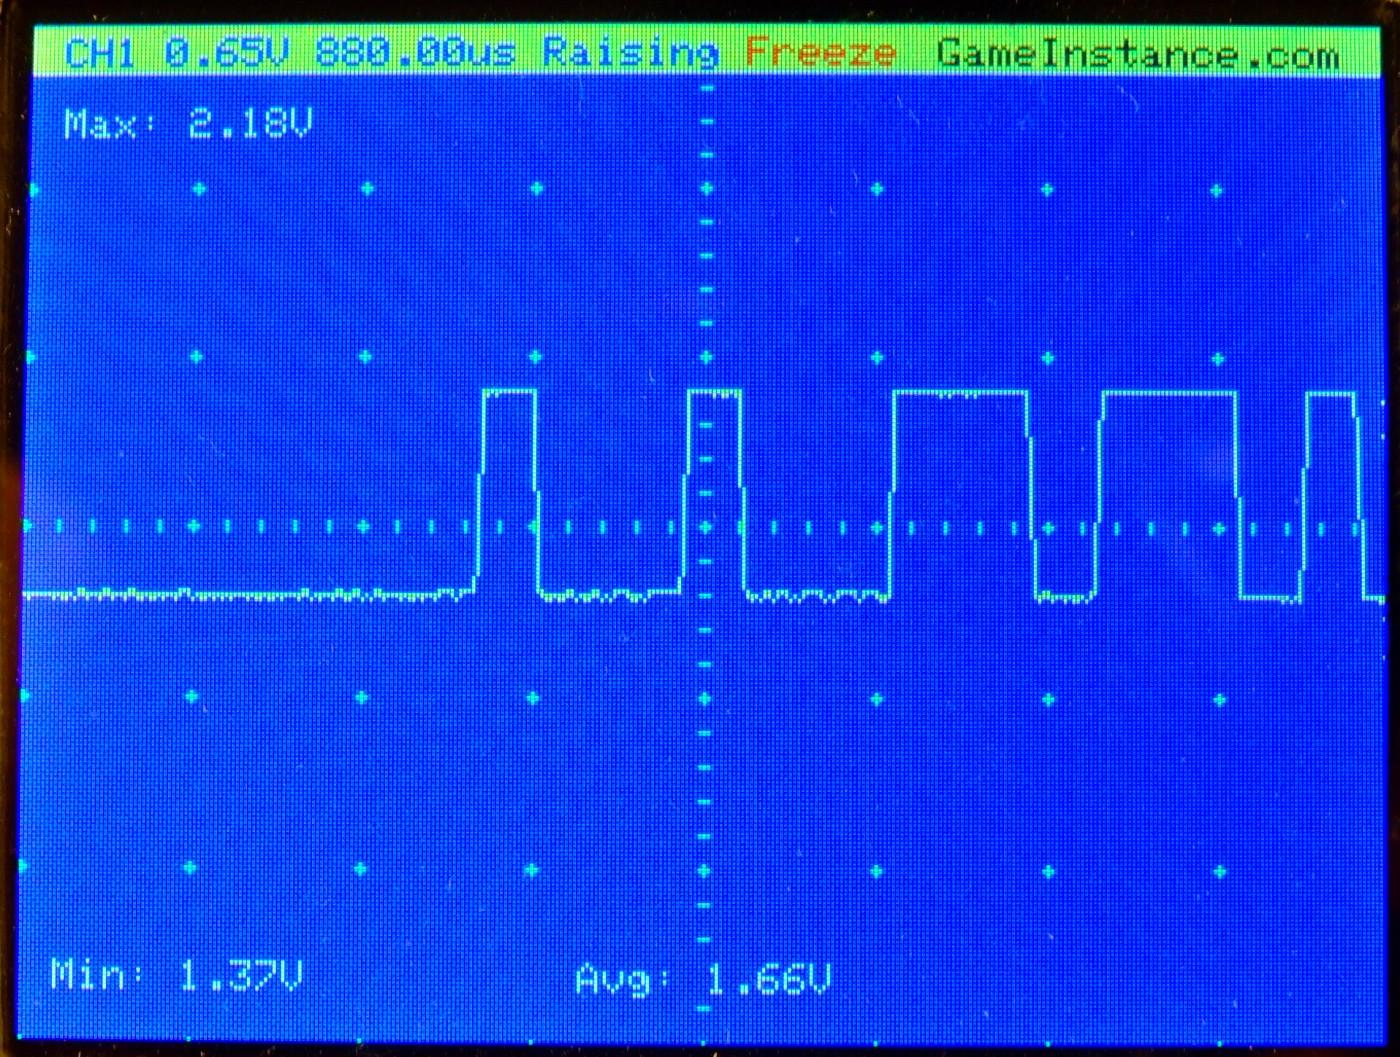 STM32 O-scope capture indicating the end of a sync section followed by the beginning of signal code: 00110...